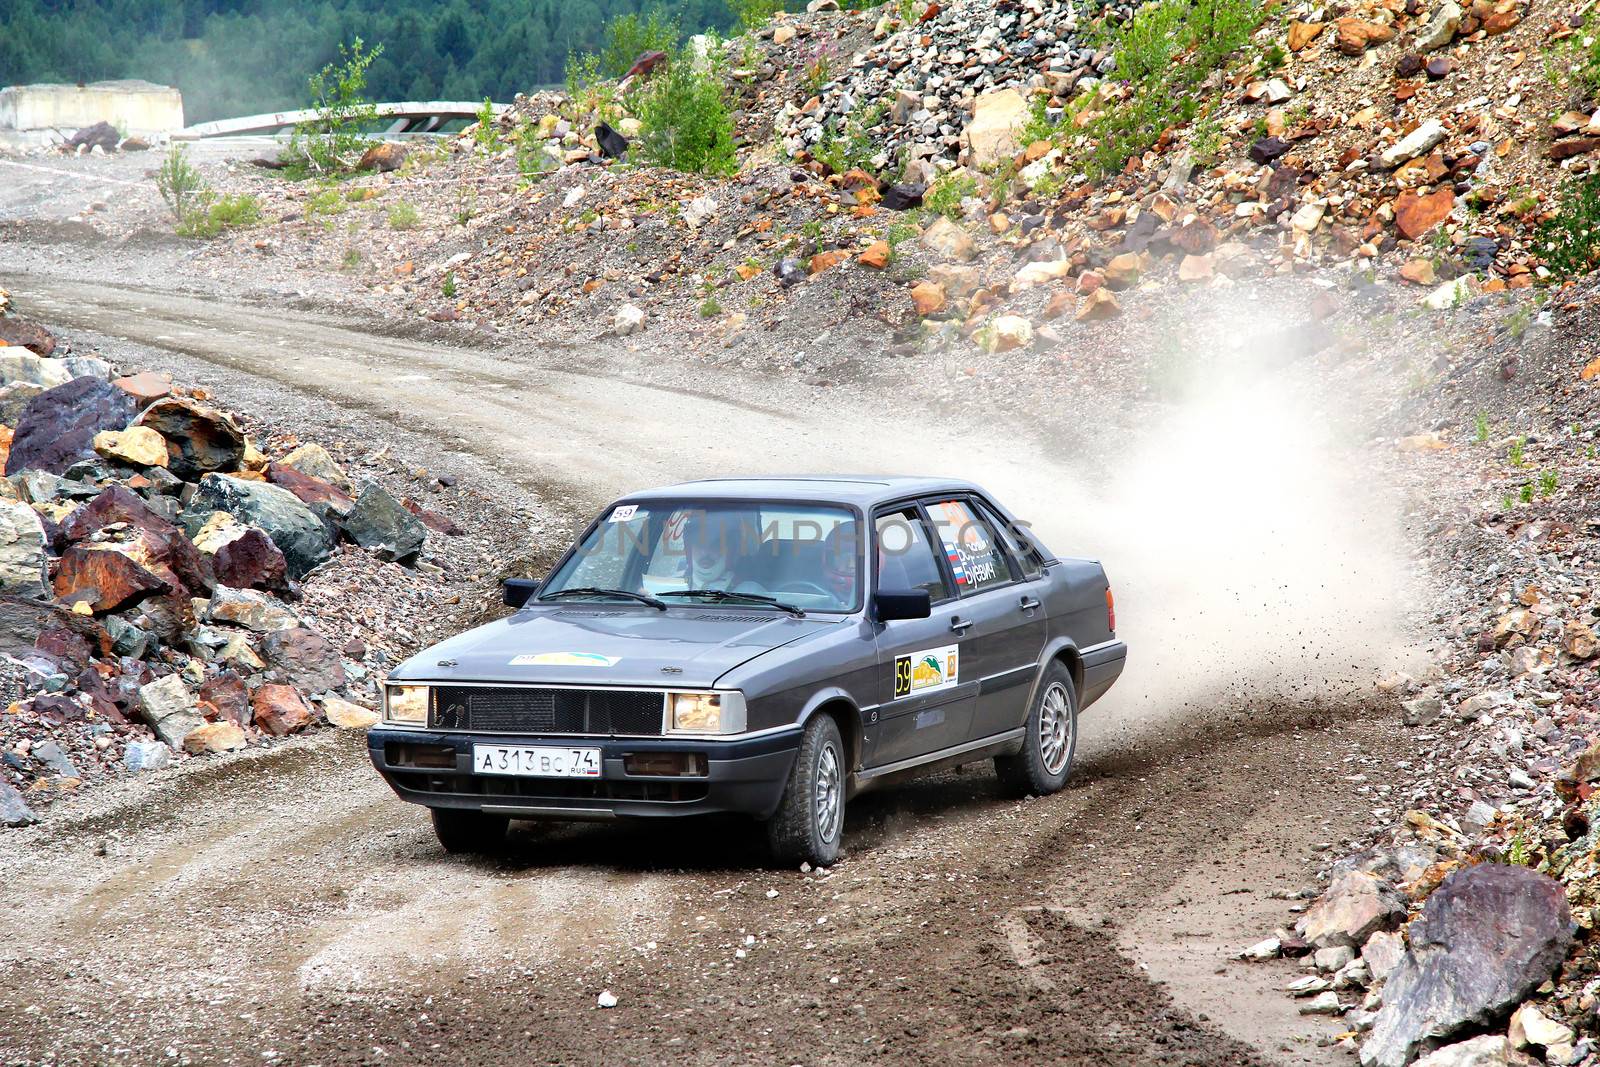 BAKAL, RUSSIA - AUGUST 21: Konstantin Berezin's Audi 80 (No. 59) competes at the annual Rally Southern Ural on August 21, 2012 in Bakal, Satka district, Chelyabinsk region, Russia.